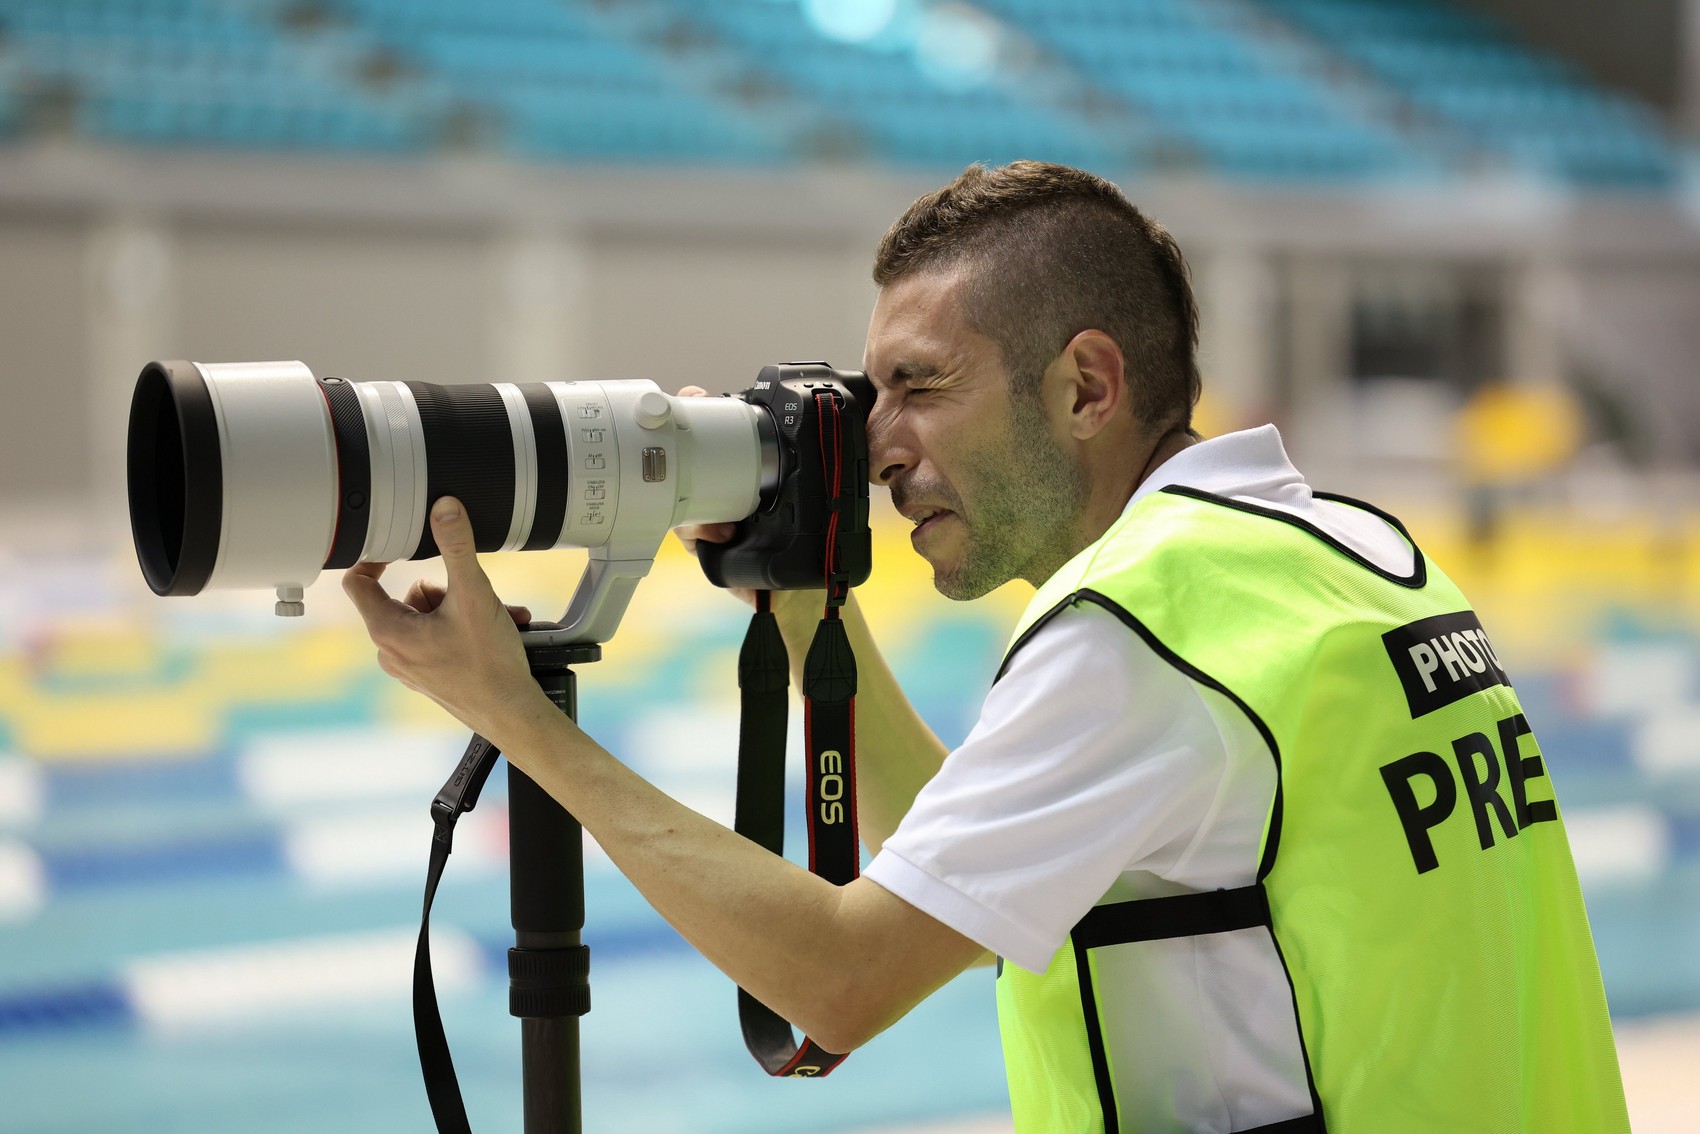 A photographer wearing a high-visibility jacket uses a Canon EOS R3 with RF 100-300MM F2.8L IS USM lens attached on a monopod.